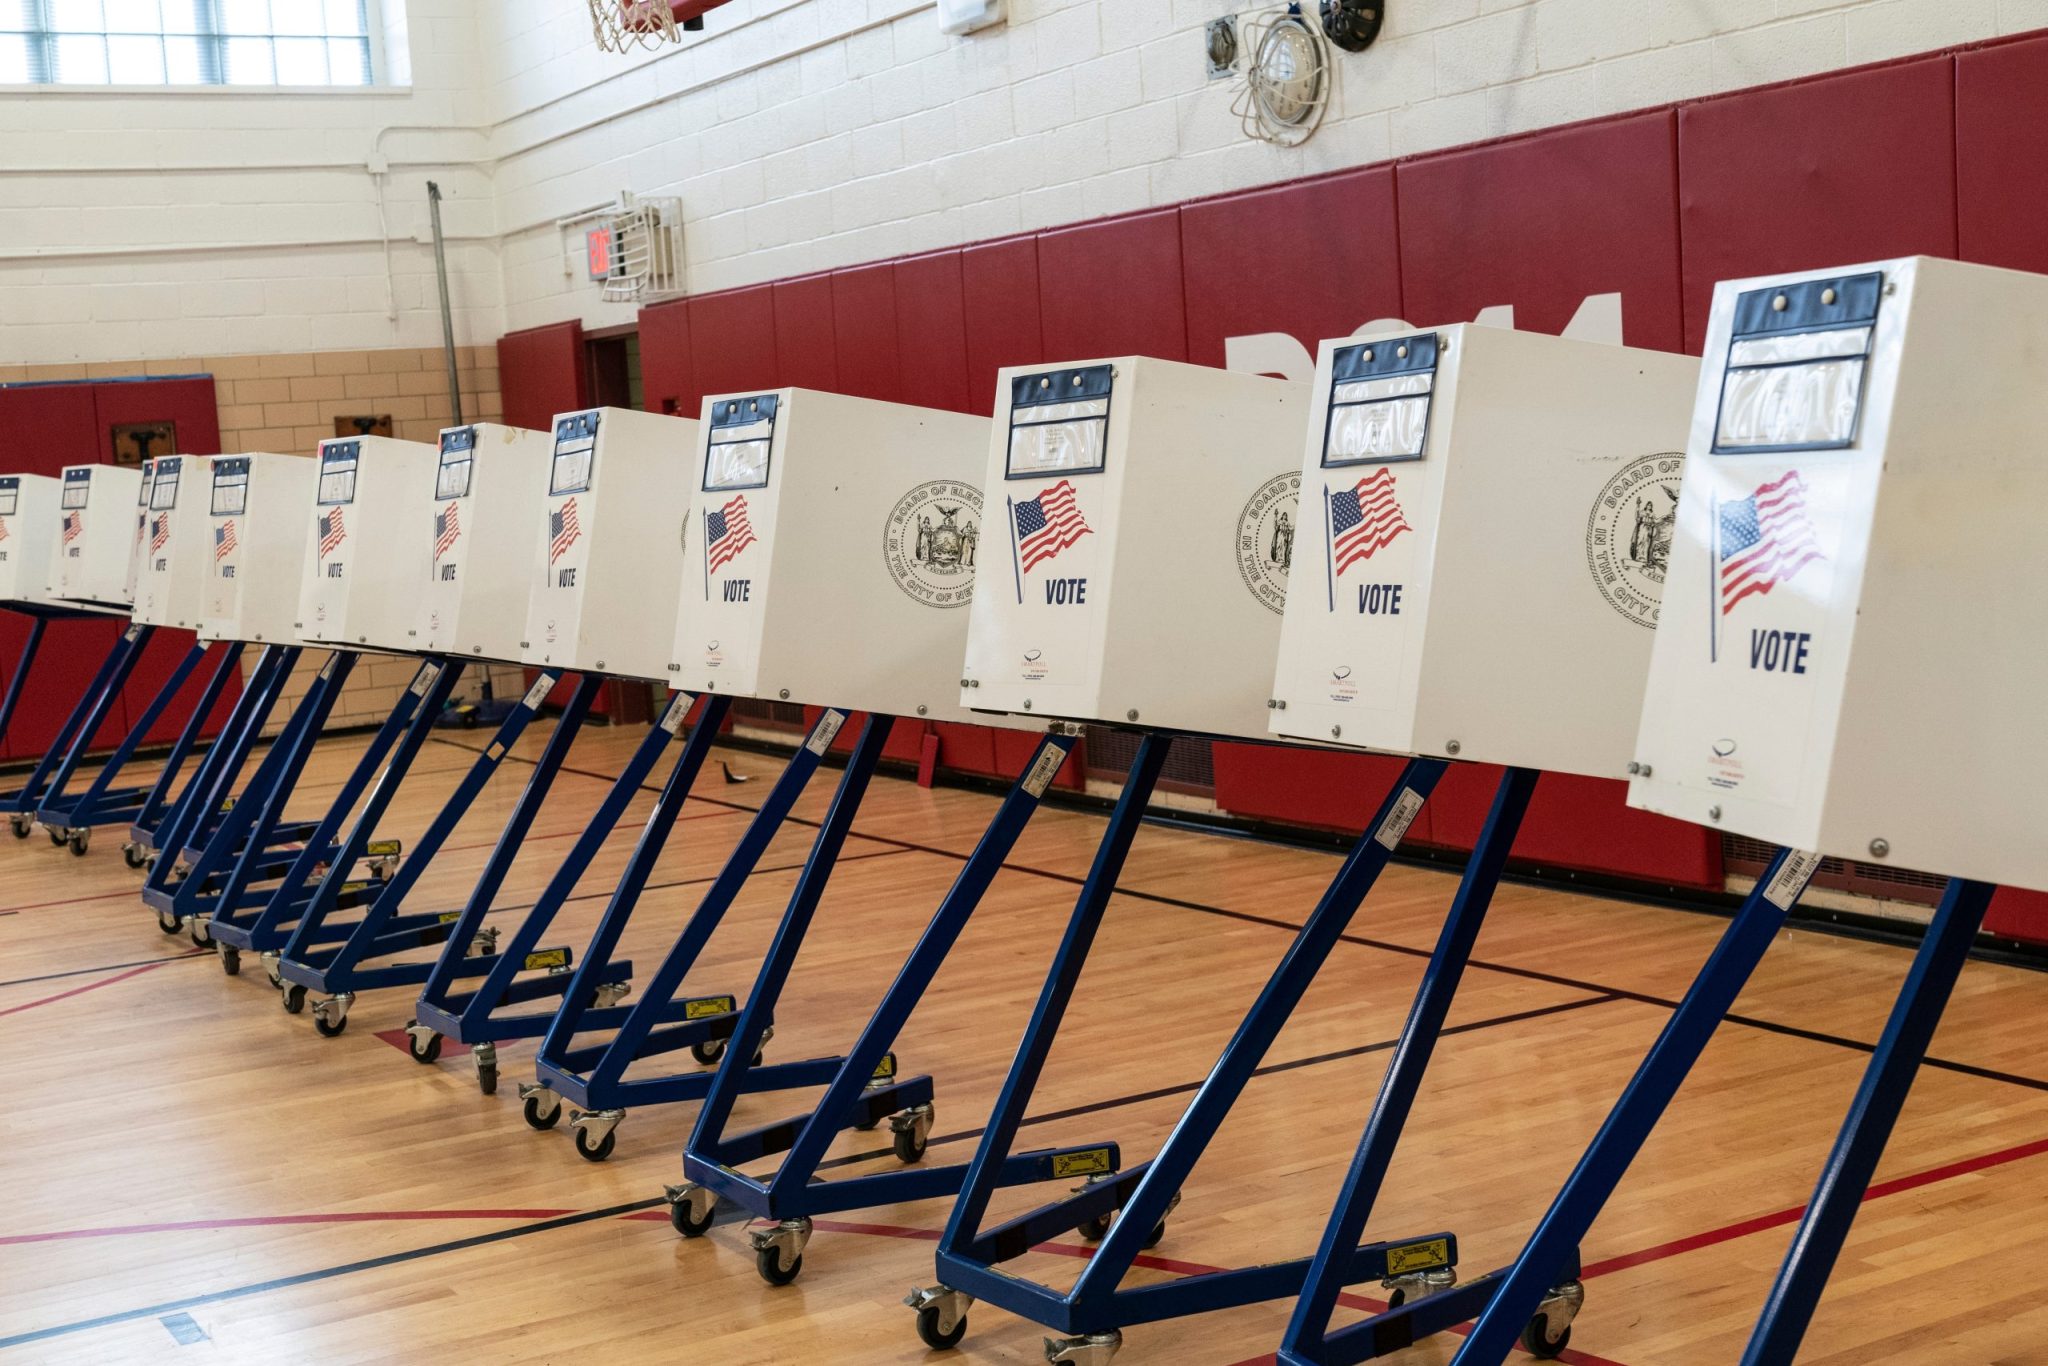 New York, NY - August 23, 2022: Voting booths seen at polling station during Democratic primaries at a school